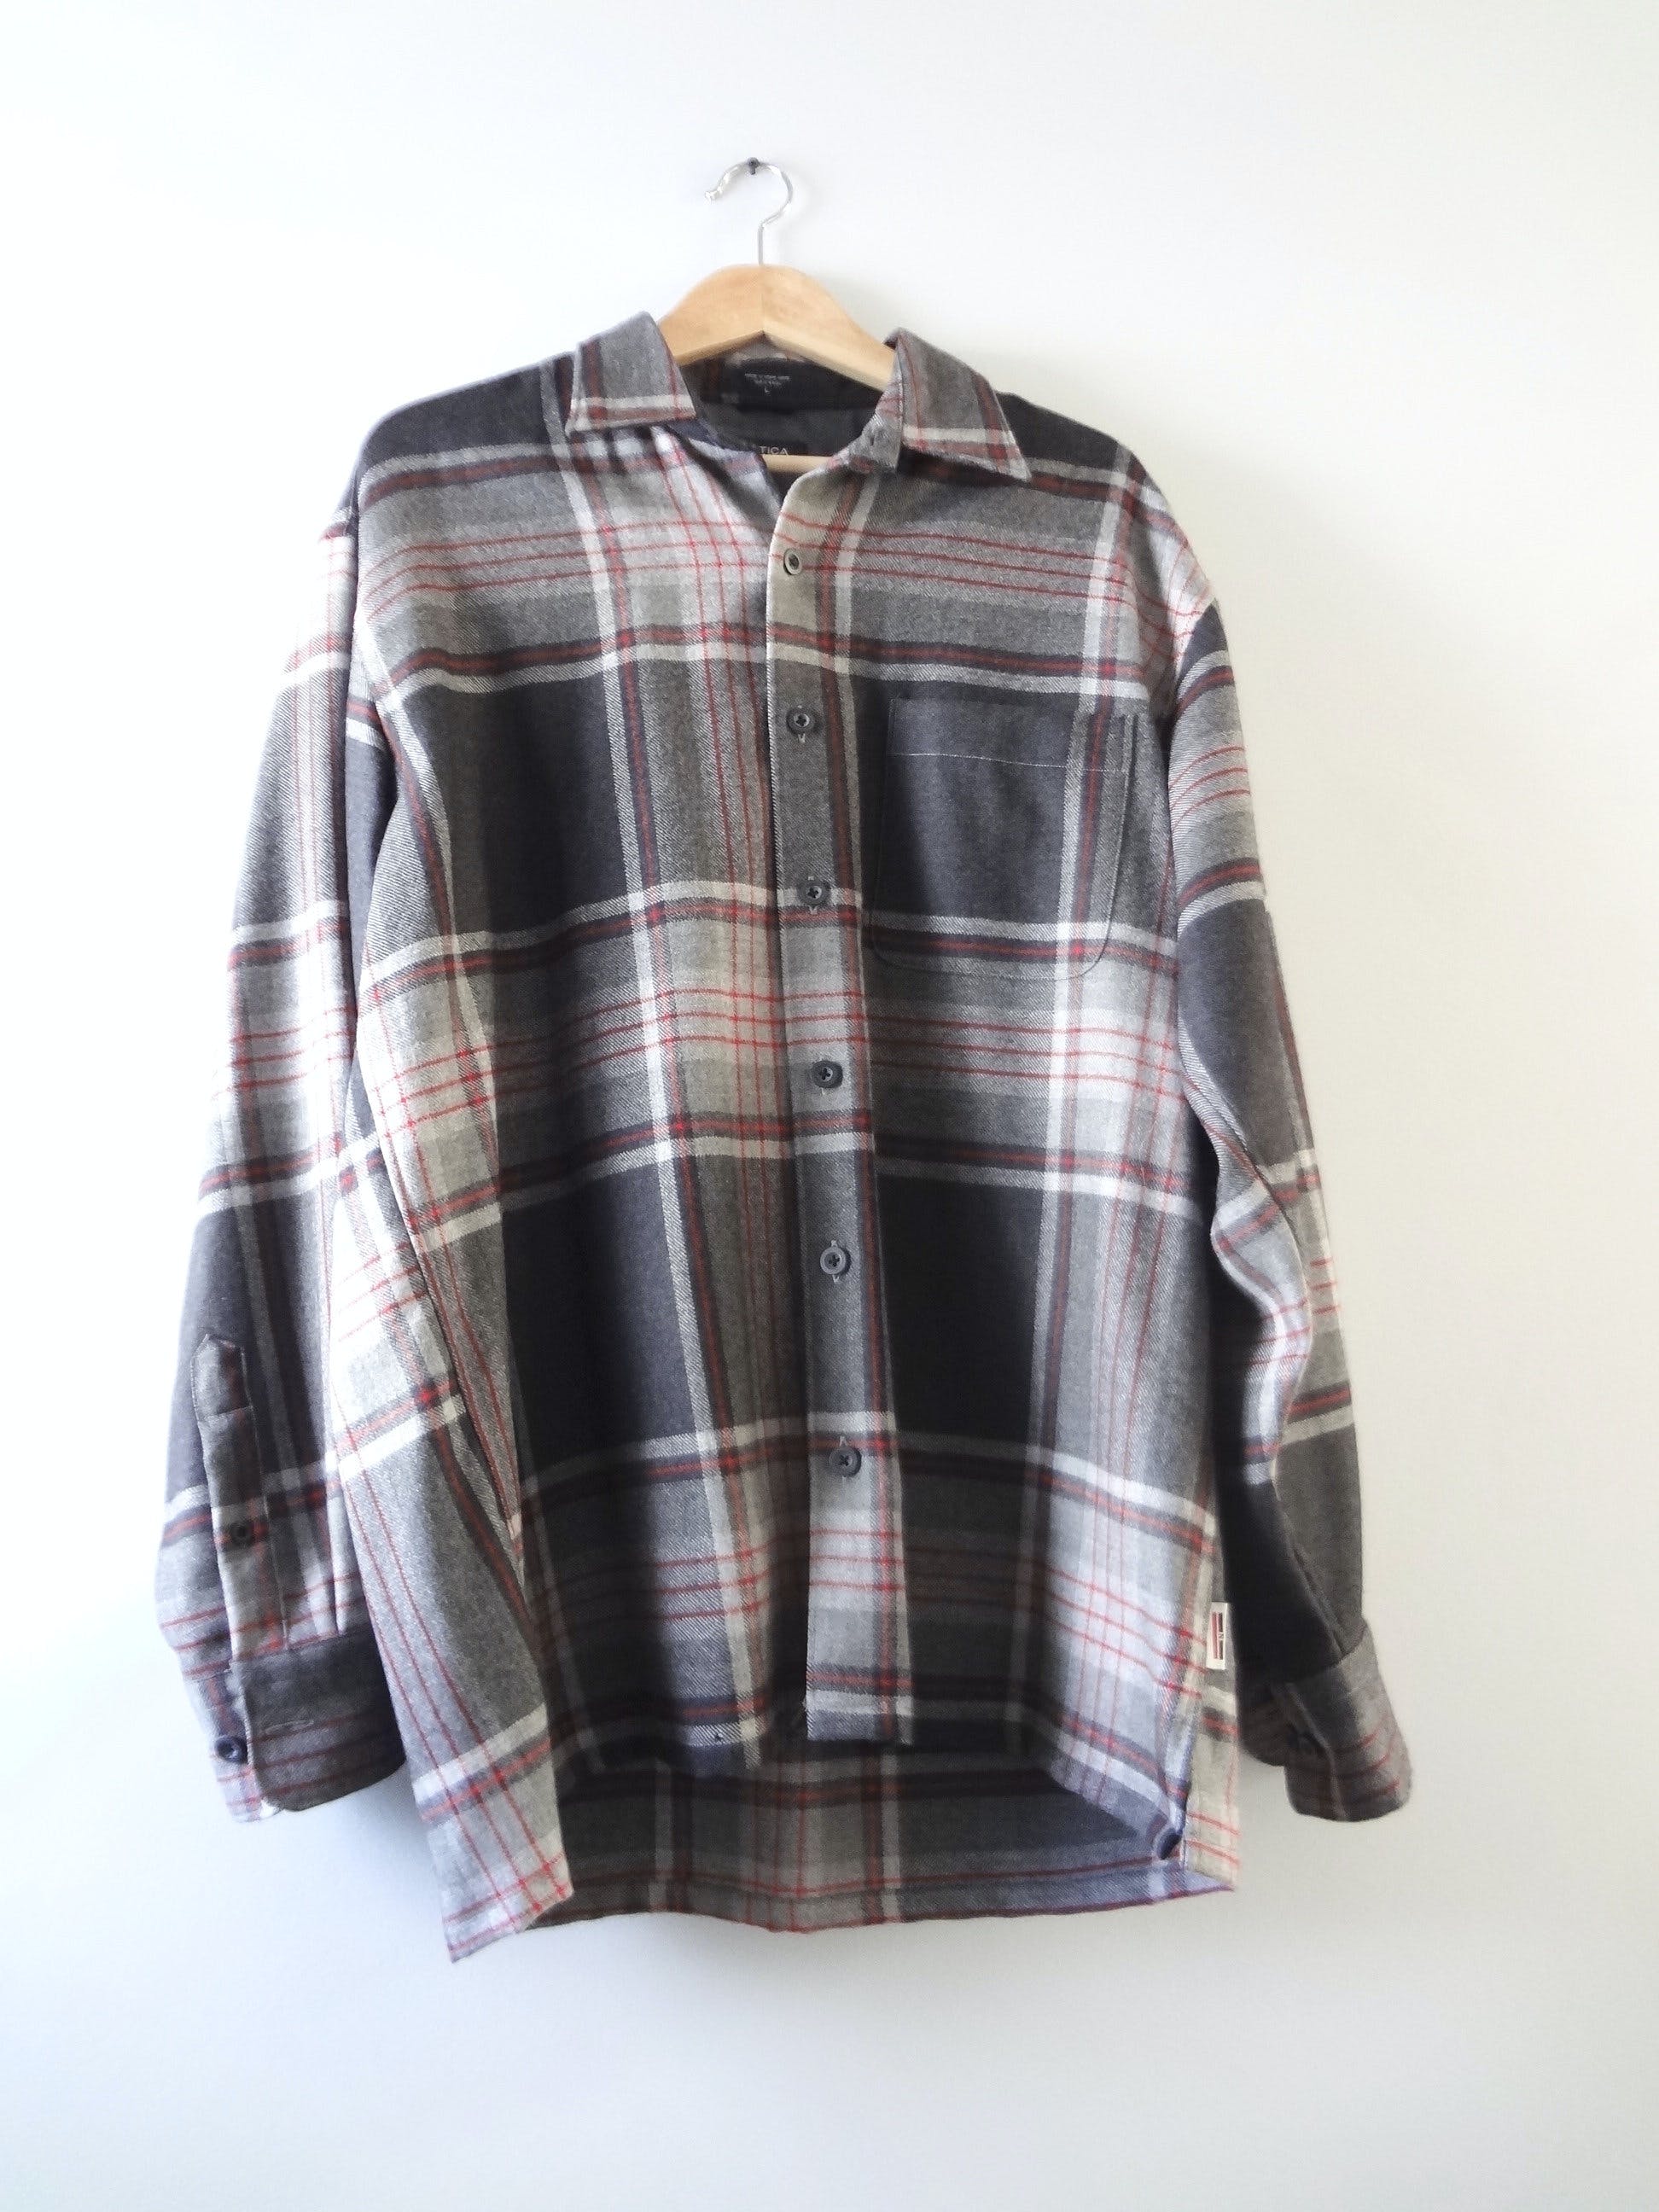 Vintage 80's/90's Gray Flannel Shirt by Nautica | Shop THRILLING